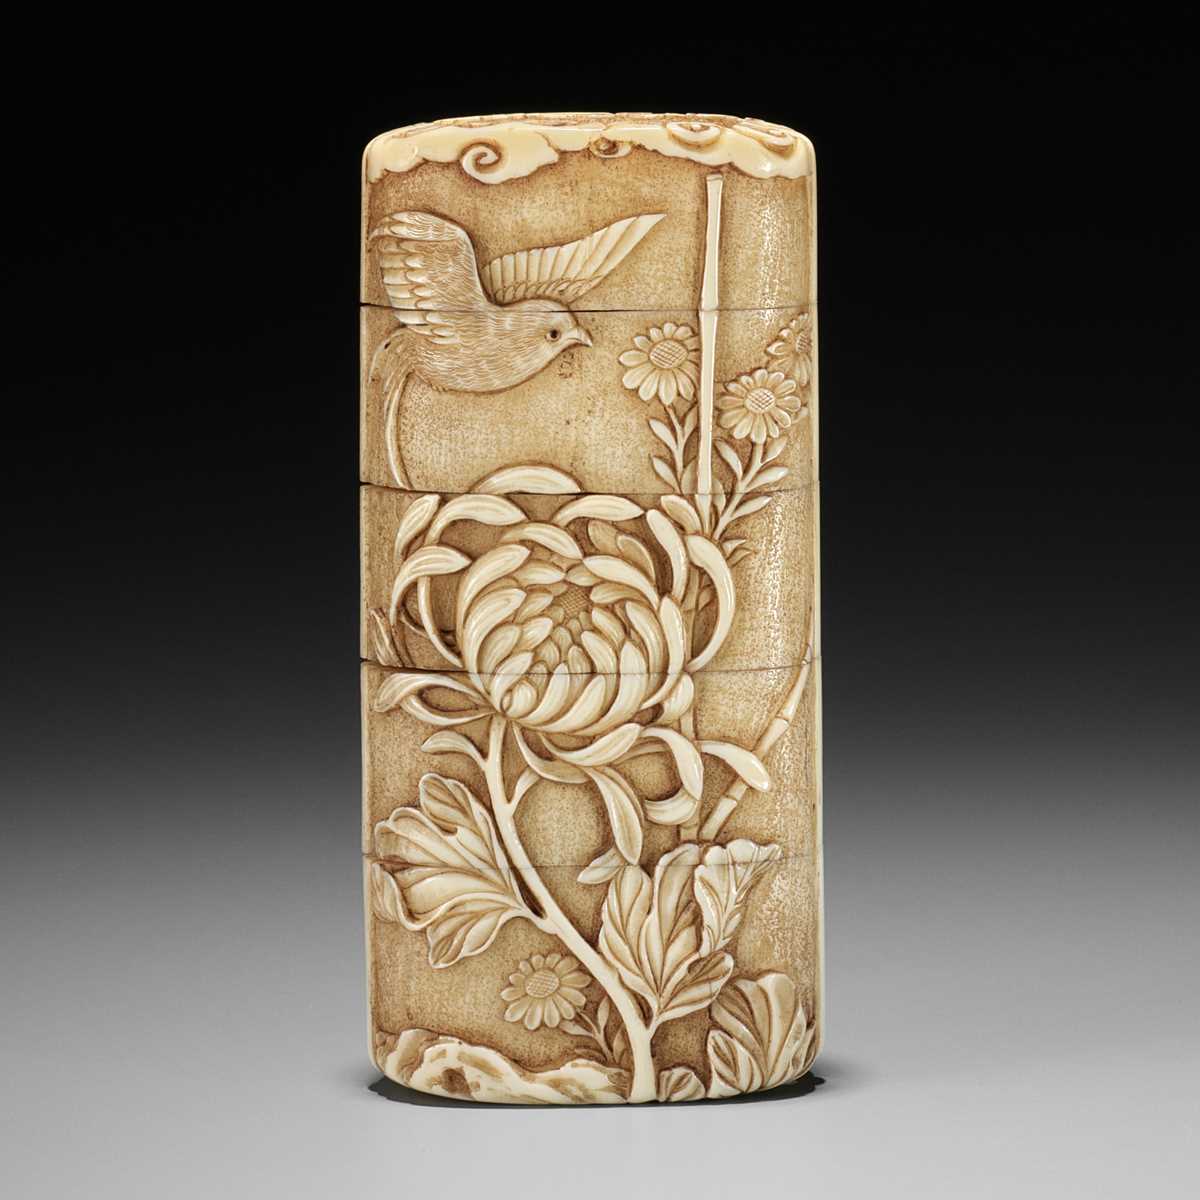 A MASTERFUL WALRUS TUSK FOUR-CASE INRO DEPICTING A SWALLOW AMONGST FLOWERS